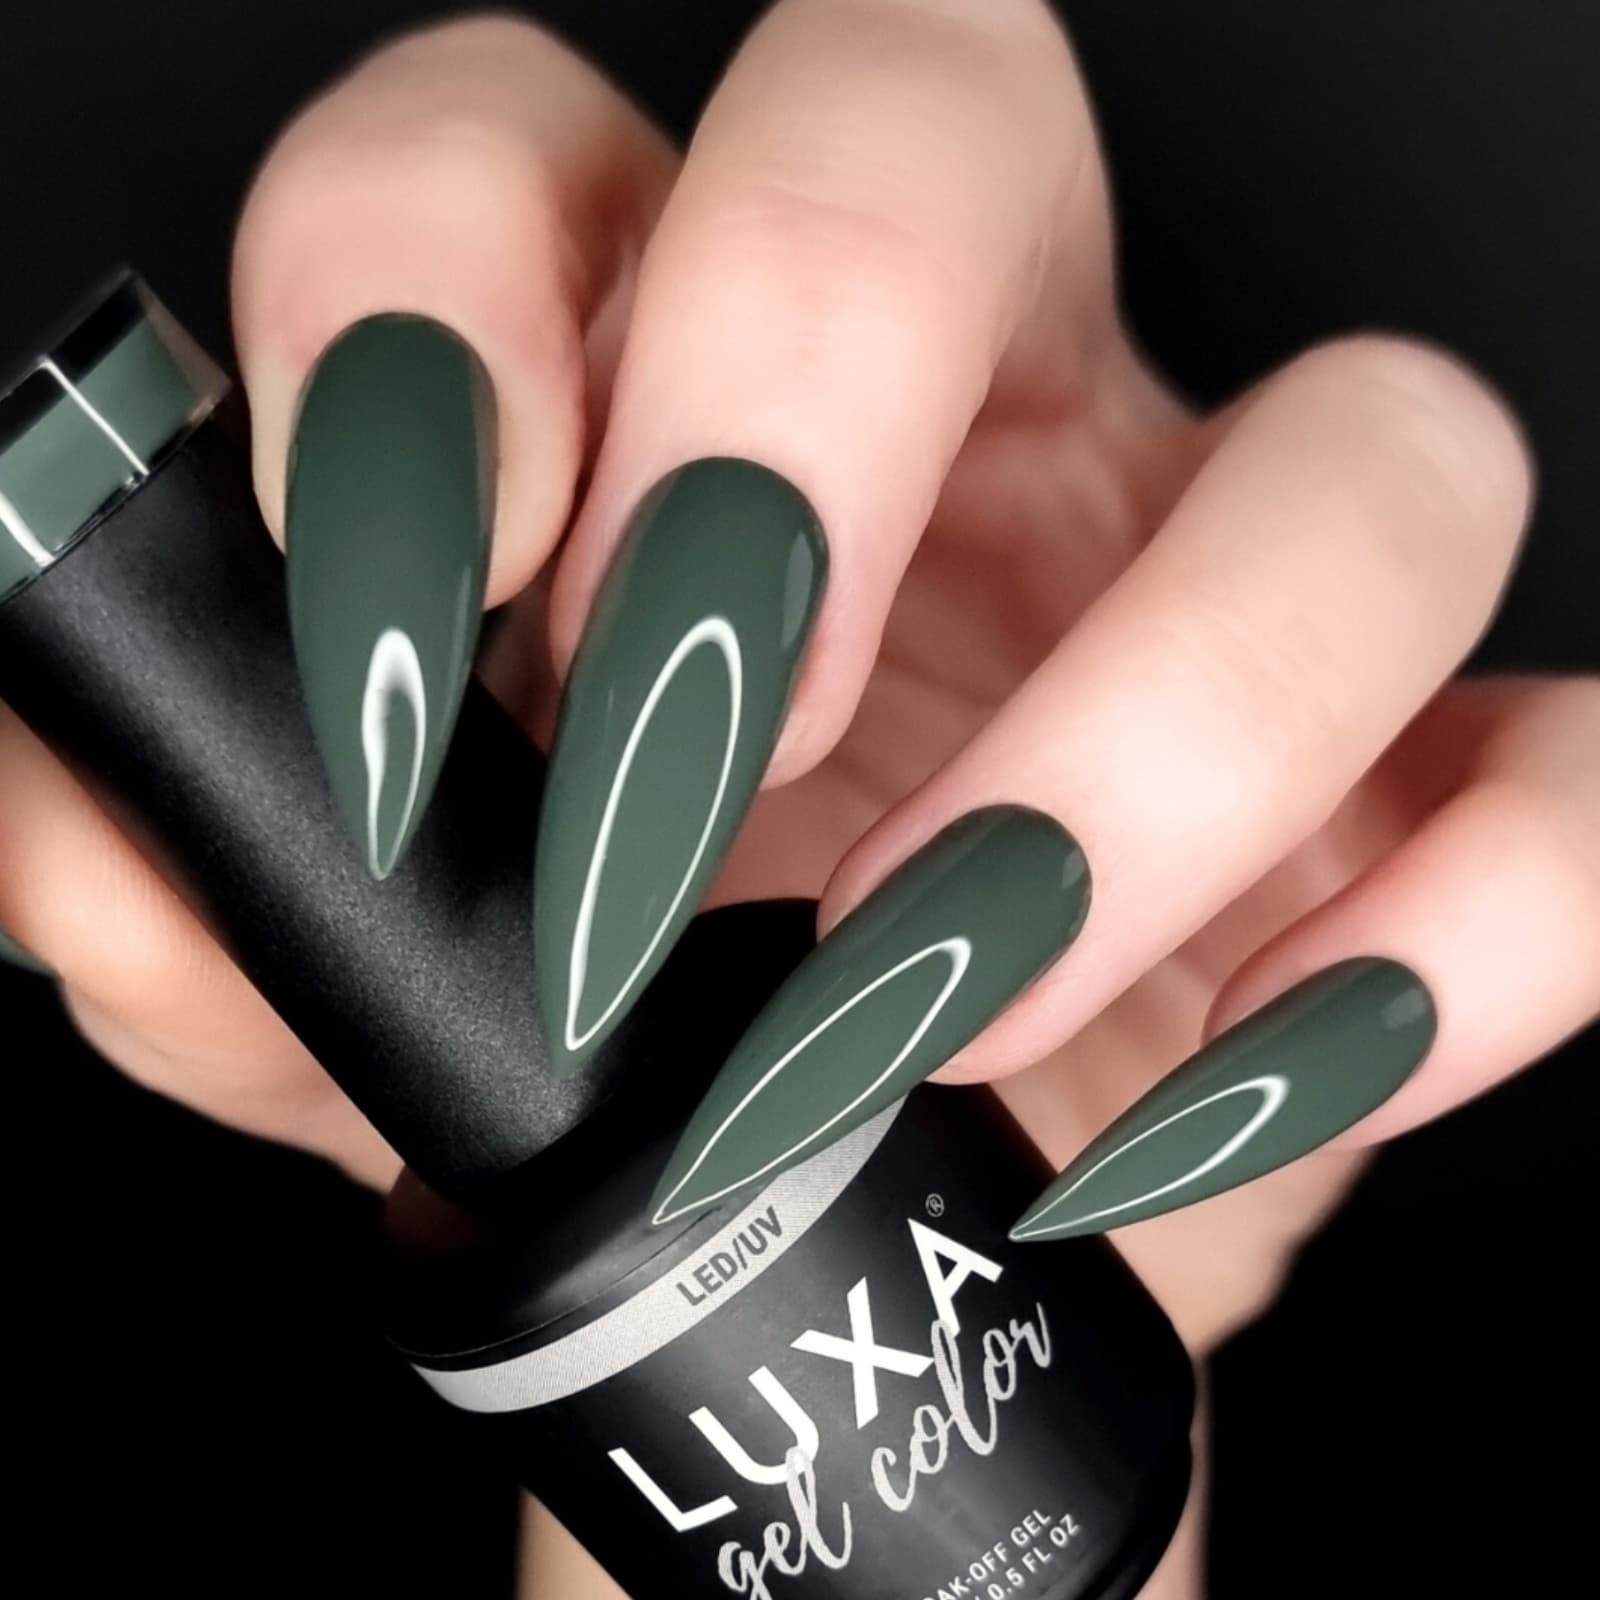 Luxapolish Olive You So